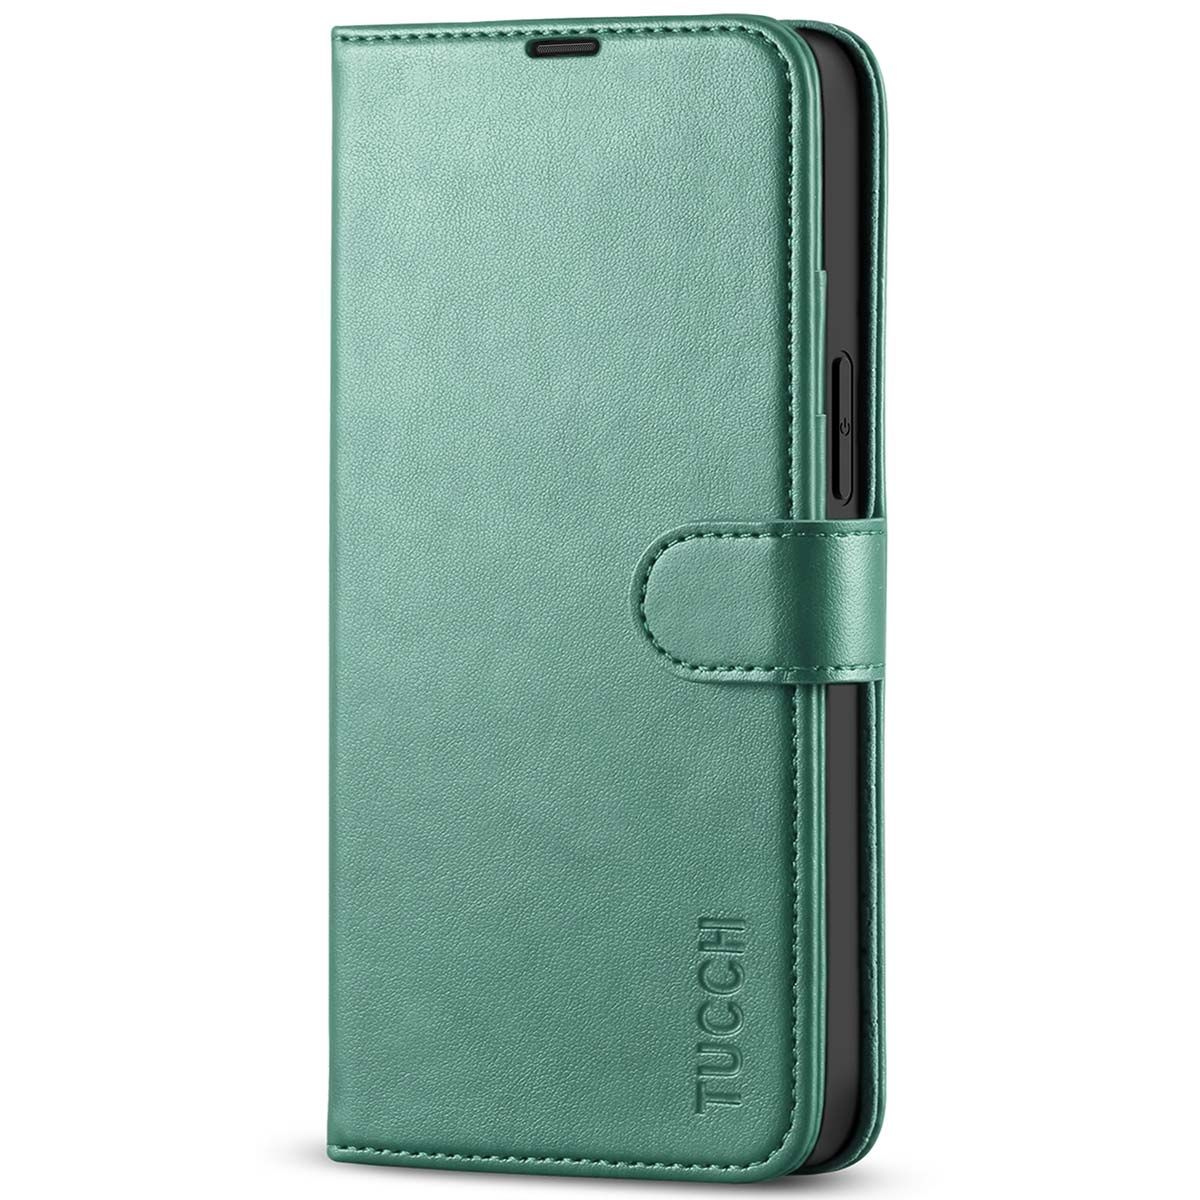 SHIELDON iPhone 13 Mini Genuine Leather Case, iPhone 13 Mini Wallet Cover  with Magnetic Clasp Closure - Midnight Green